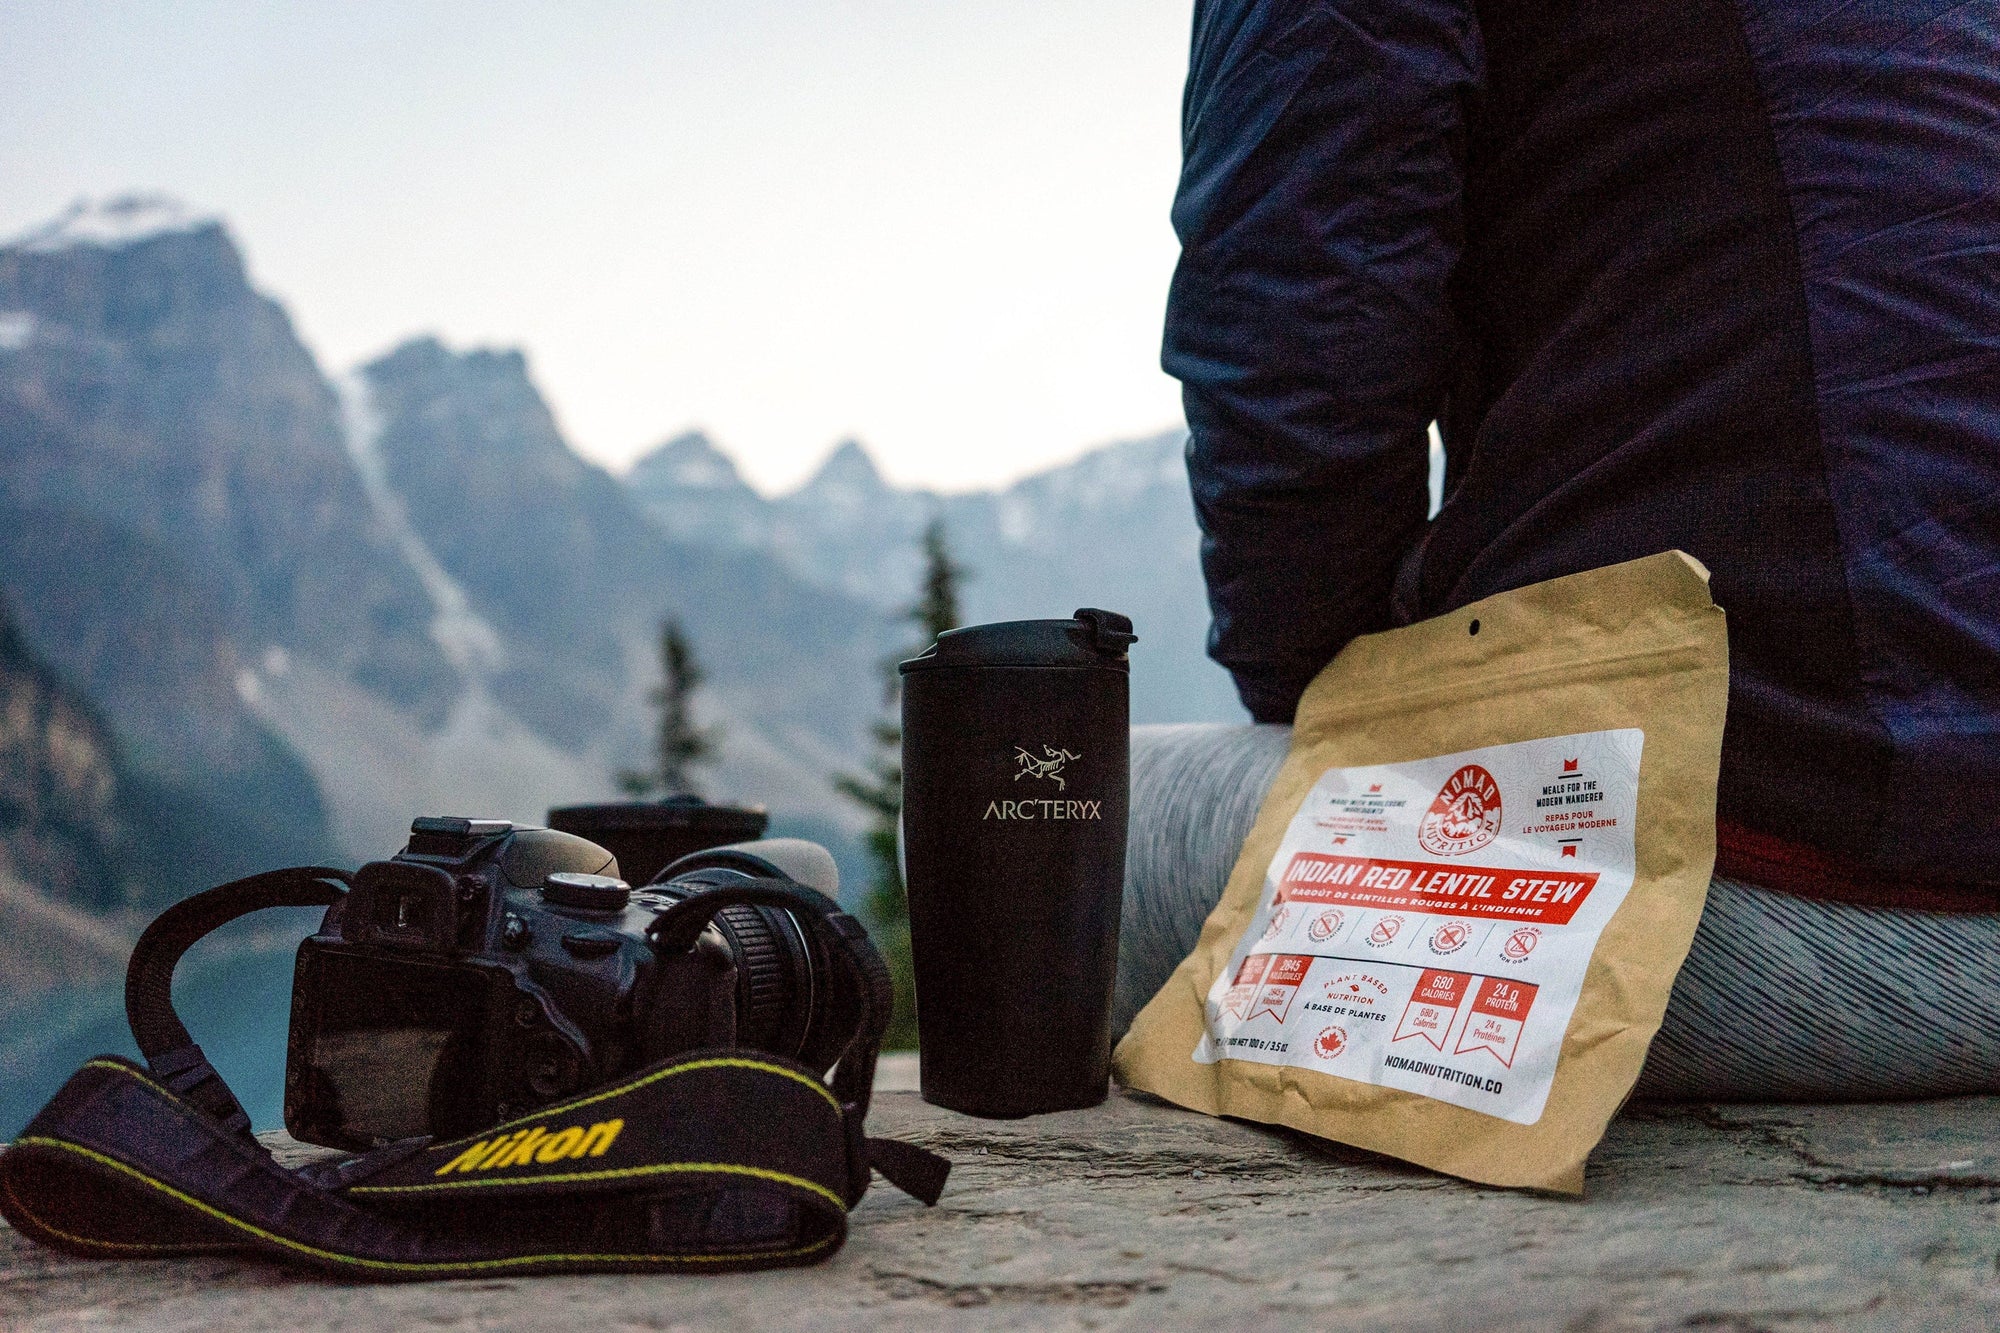 Nomad Nutrition Indian Red Lentil Stew 112g or 4oz meal size next to person, thermos, and camera. Scene overlooking blue lake and snow capped mountains. Convenient size for travelling.